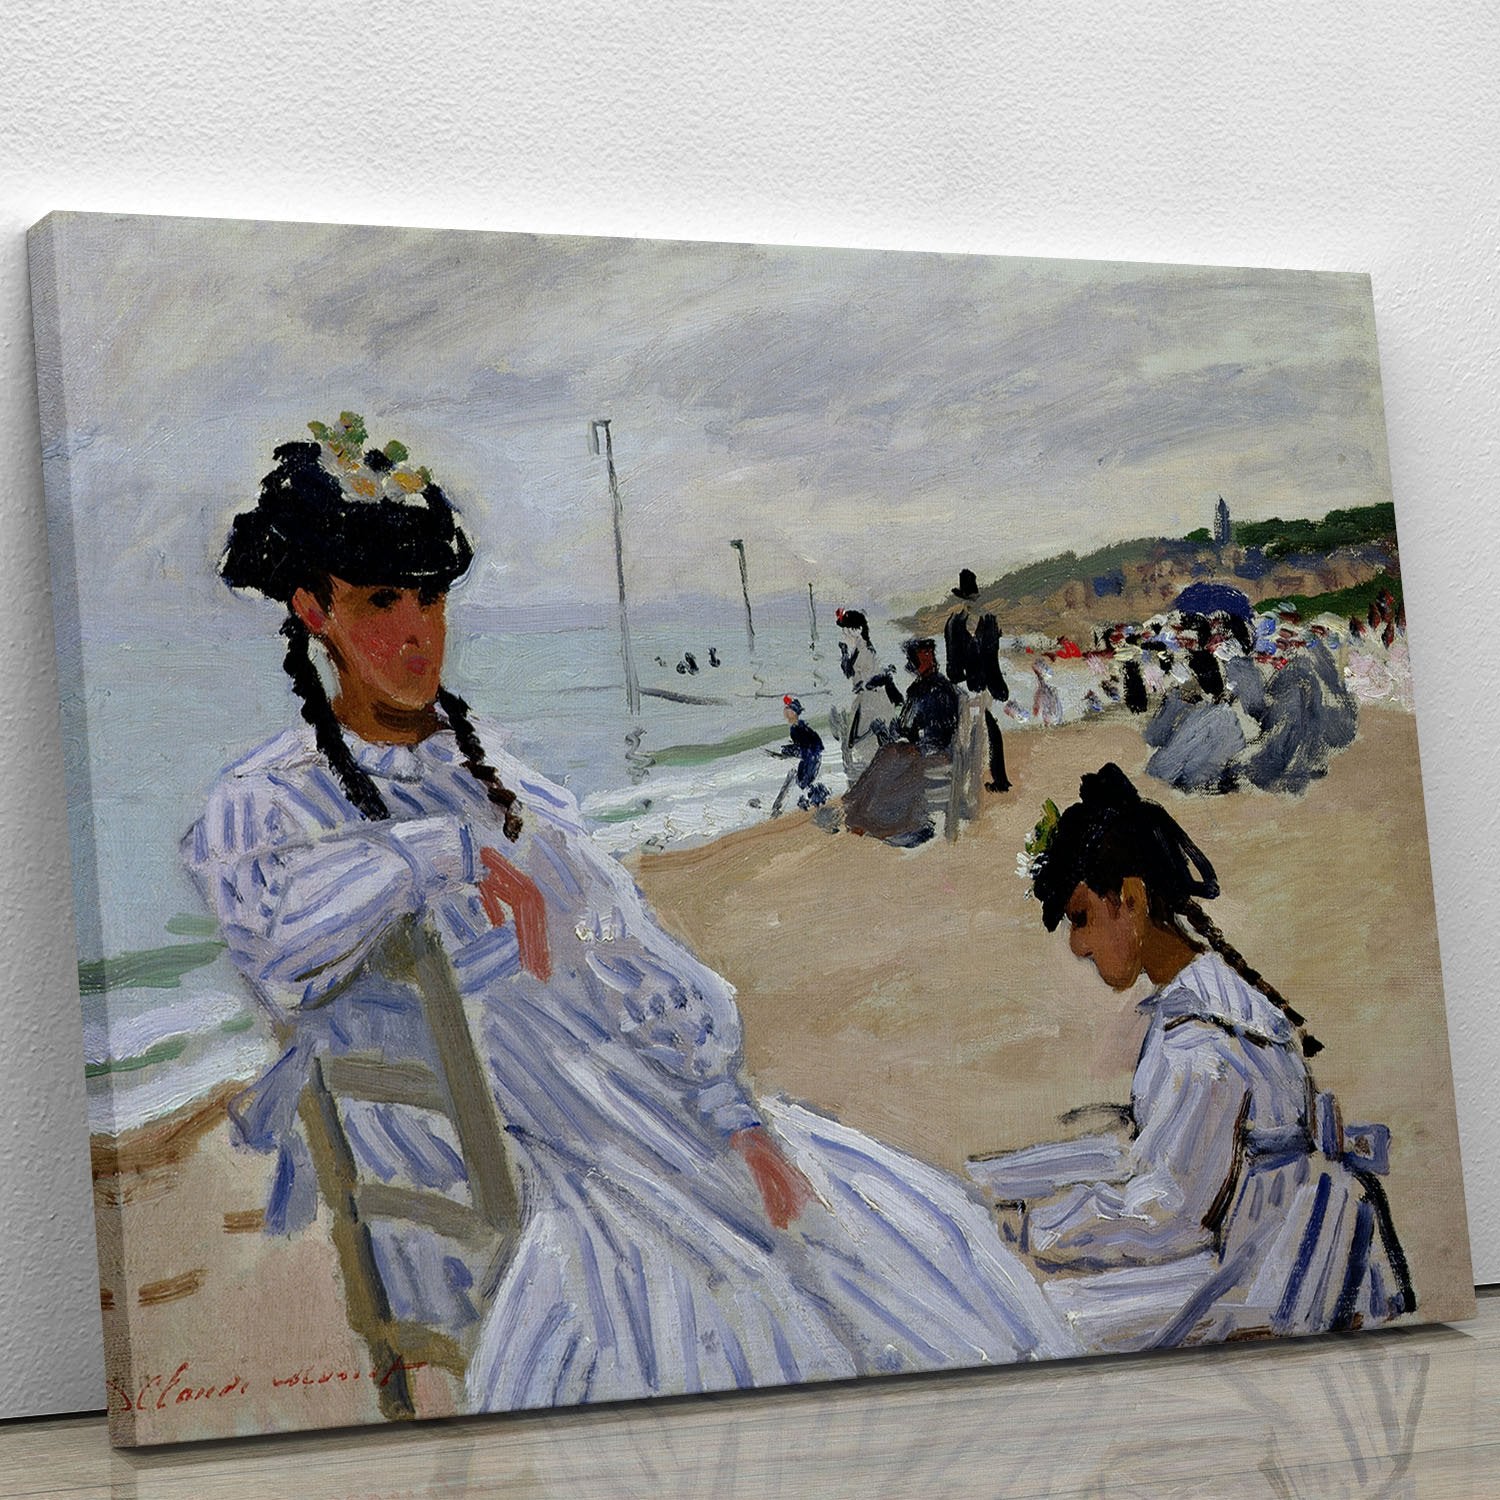 The beach at Trouville by Monet Canvas Print or Poster